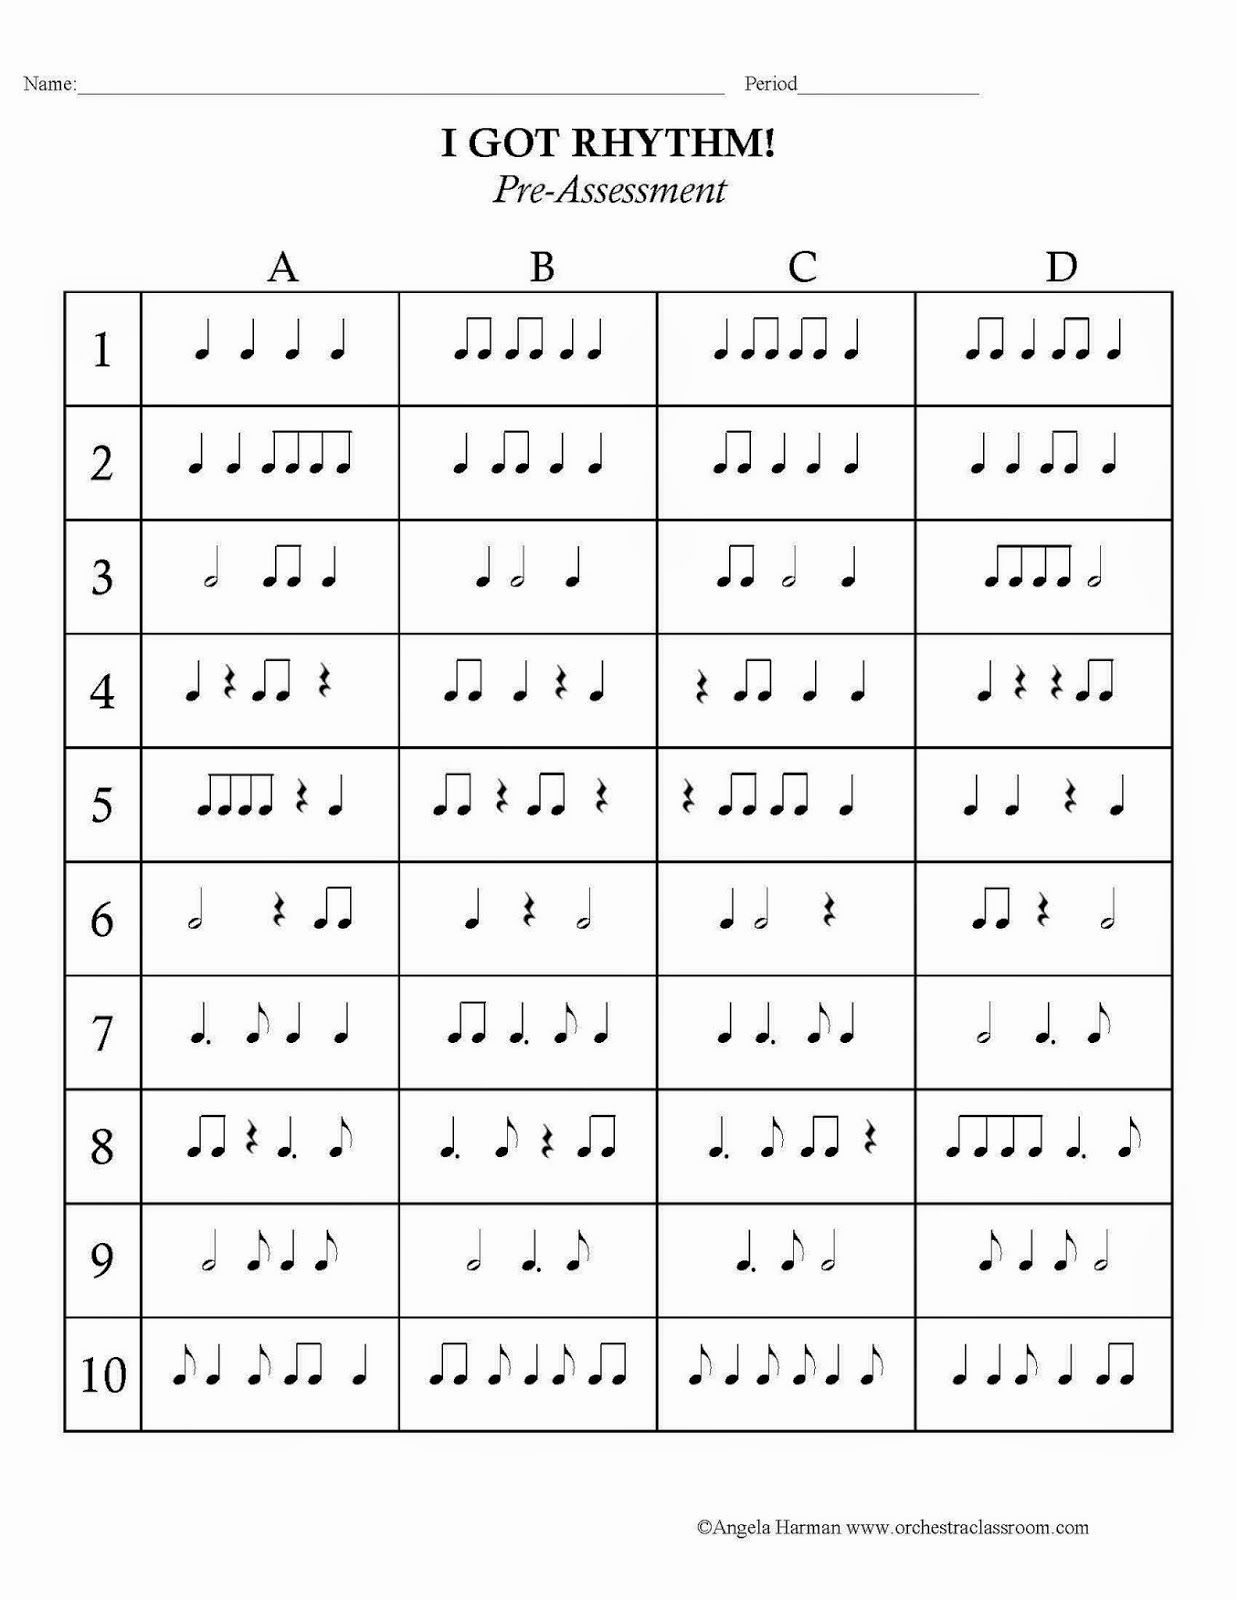 Rhythm Worksheets for Band Beautiful Check Out This Awesome Rhythm Resource for Your Music